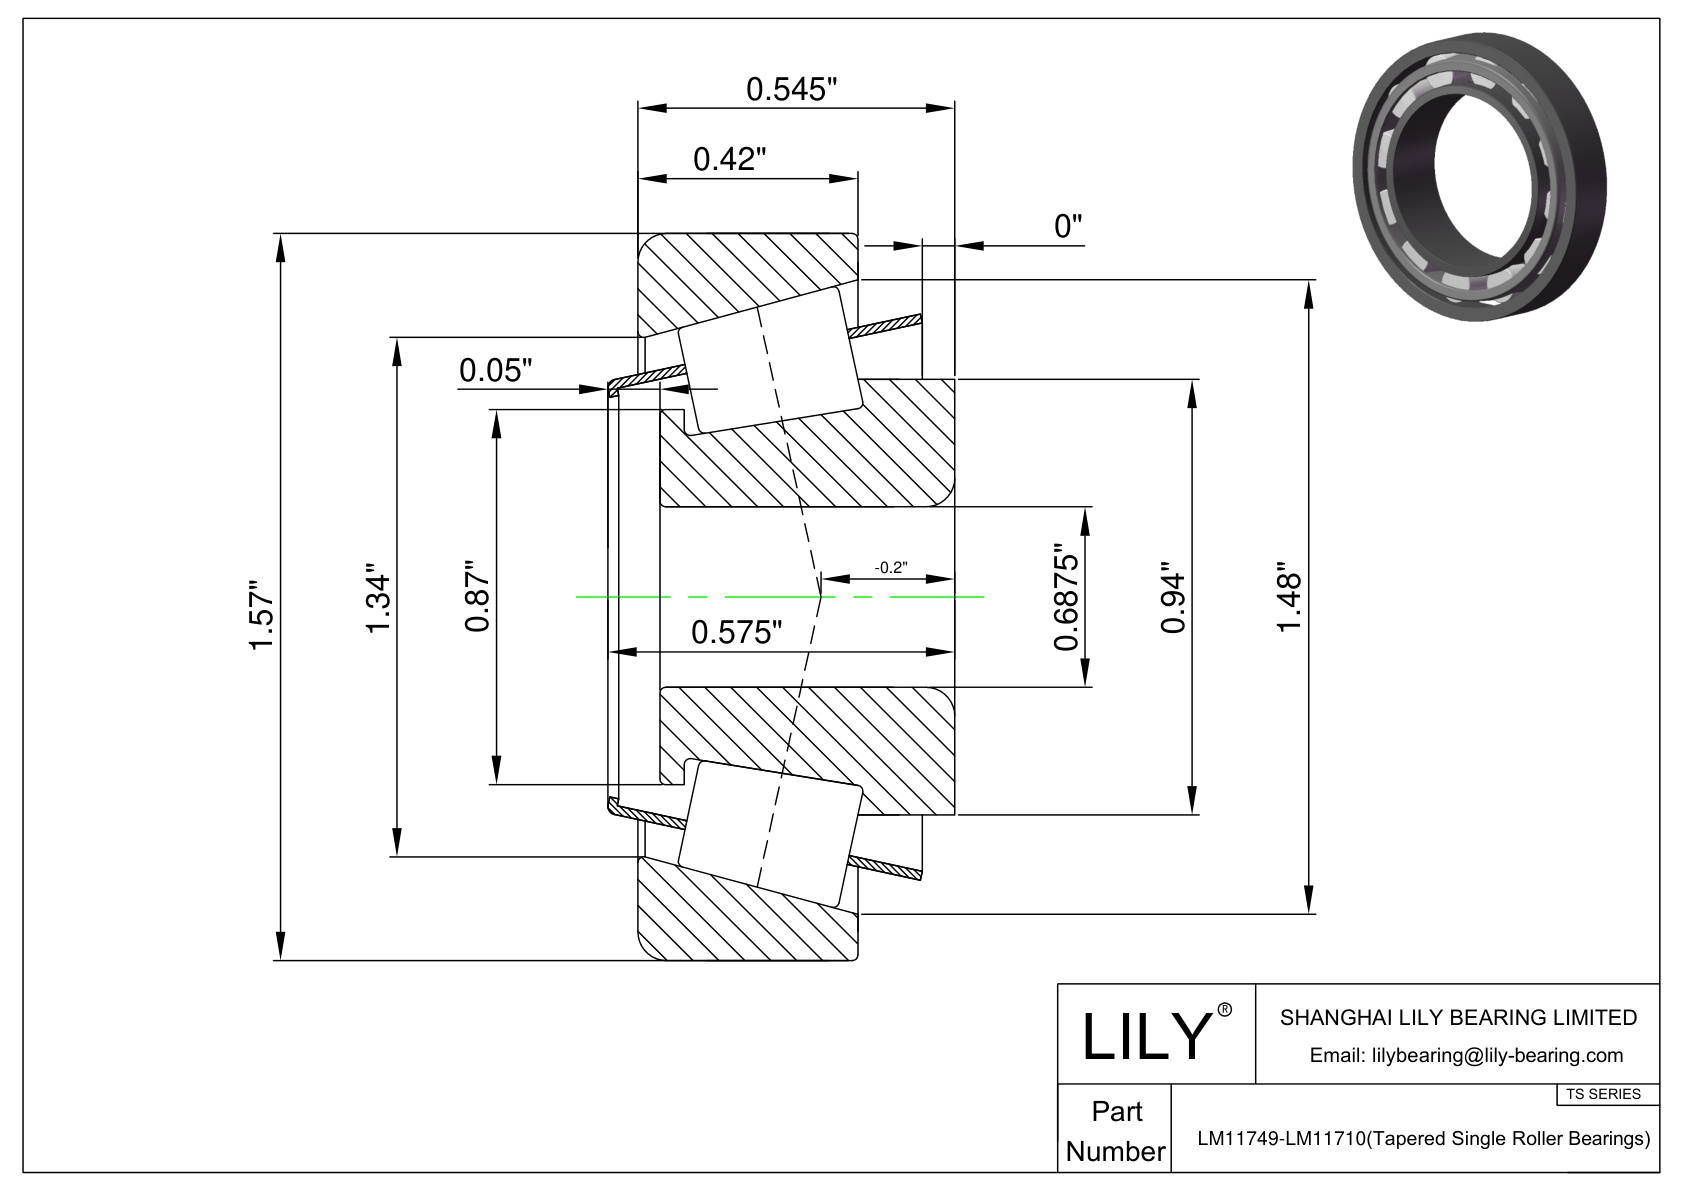 LM11749-LM11710 TS (Tapered Single Roller Bearings) (Imperial) cad drawing